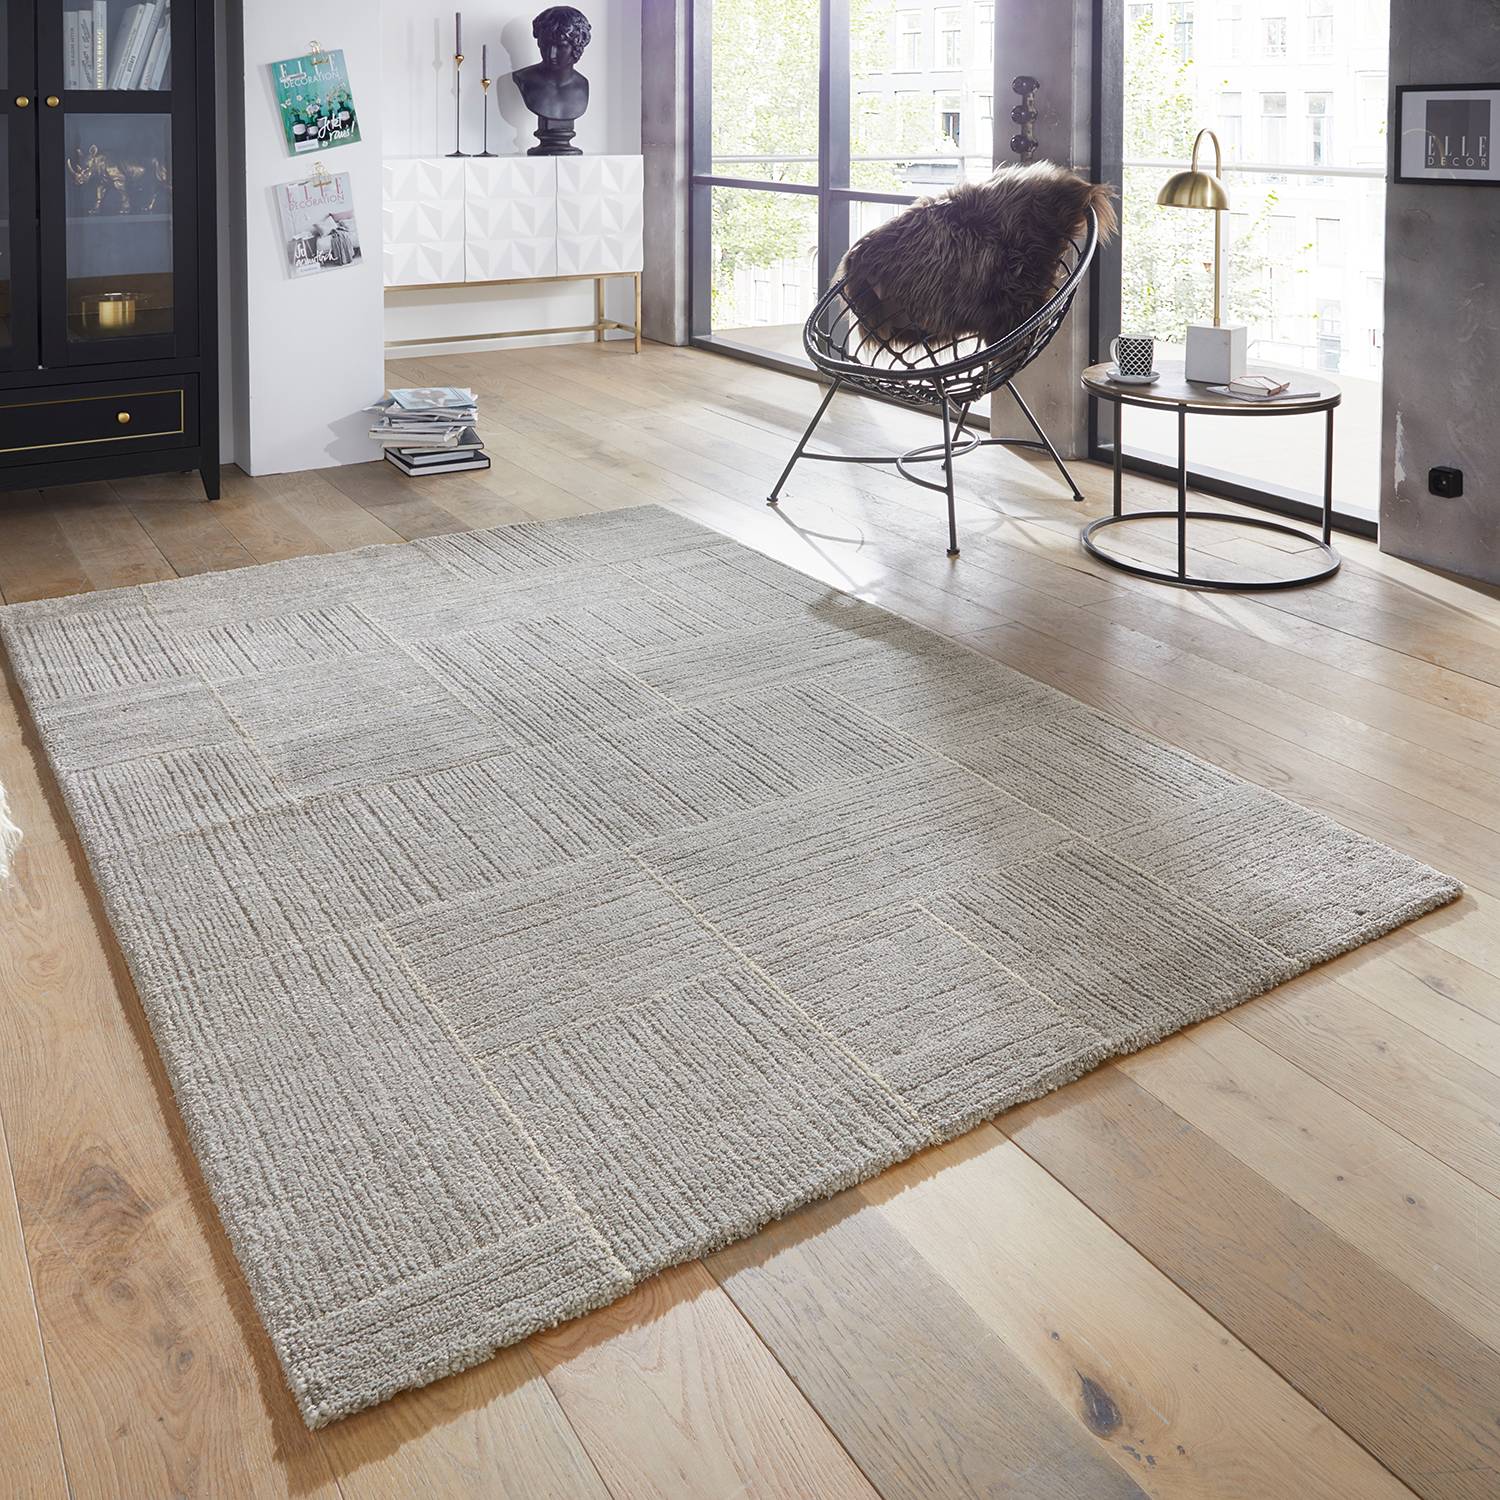 Image of Tapis Castres 000000001000167831